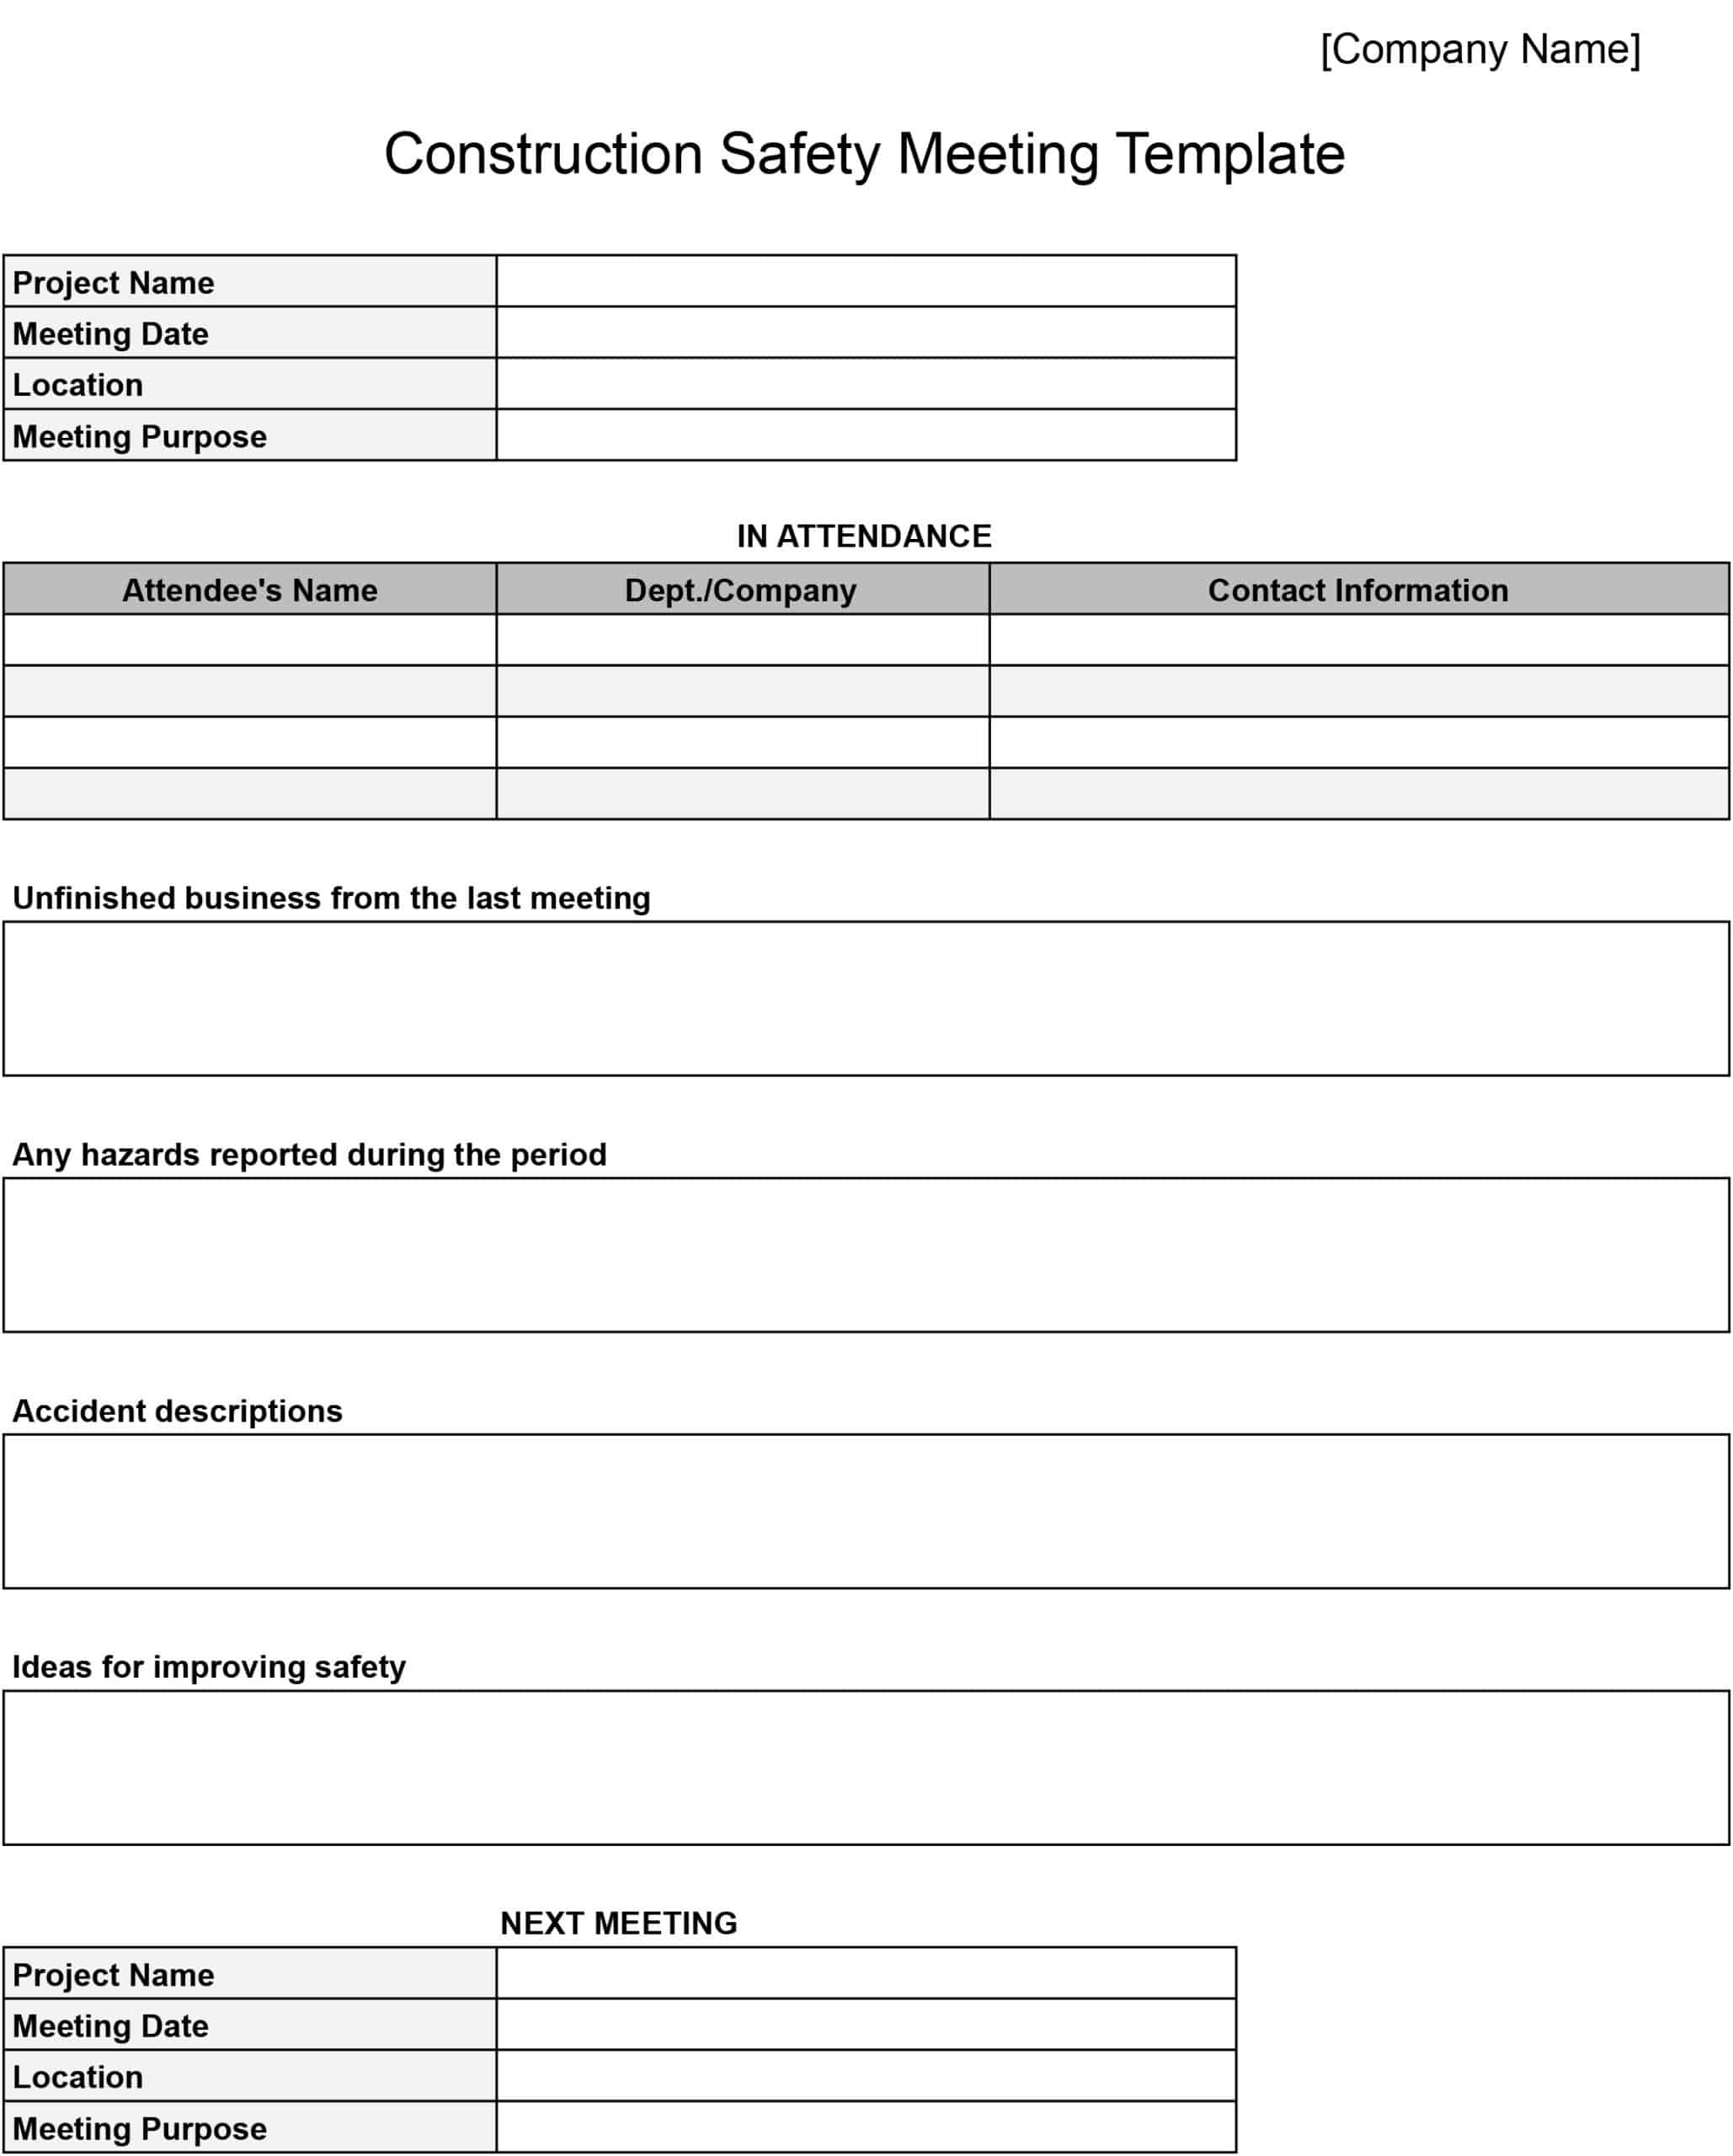 Construction Safety Meeting Template